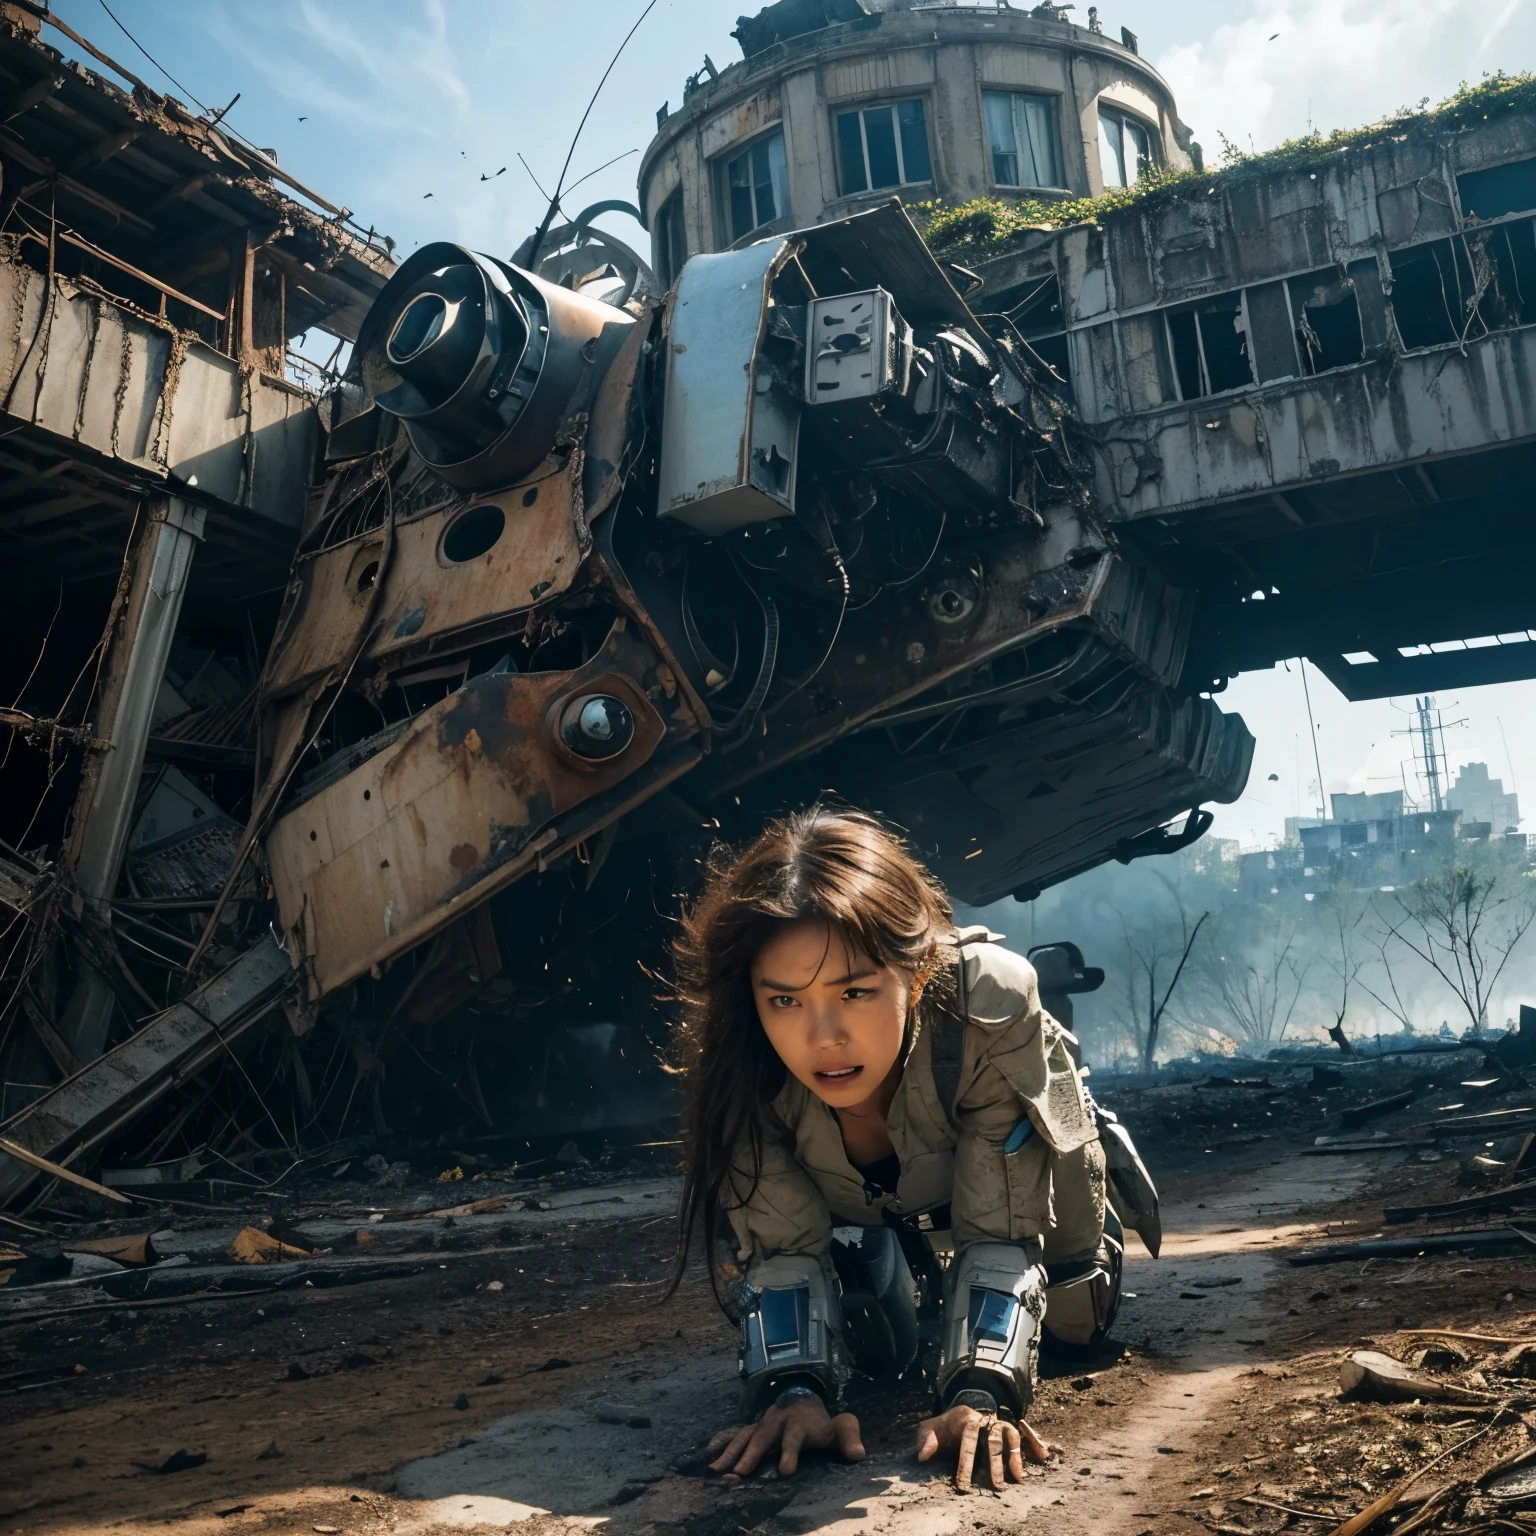 (highest quality、4K、High resolution、master piece: 1.2)、Super detailed、real: 1.37、Natural light、Portrait、surreal colors、futuristic style、Crumbling cityscape、Overgrown vegetation、Foggy atmosphere、Contrasting shadows、tattered clothes、A strong and confident gaze、Abandoned Objects、desolation、Destroyed building silhouette、vivid graffiti、Empowering pose、hair fluttering in the wind、Expressive facial features、unforgettable beauty、Dramatic sky、eerie clouds、intricate details、urban decline、post-apocalyptic setting、Ruins in nature 、Majestic Skyline、Desperate struggle、Creepy Presence、Thought of power、Enhanced Thought of power、intensity of emotions、Tense atmosphere、heroic attitude、intense action、Fearless Determination、Survival from all odds、Dangerous landscapes、Iconic battle、cinematic composition、epic showdown、A moment frozen in time、mysterious aura、fortitude、Women&#39;s Support、strong female protagonist、Fascinating story、Women's poweerce determination、Empowering Stories、(Behind her, a giant invader mech is on fire and collapsing.:1.55)
